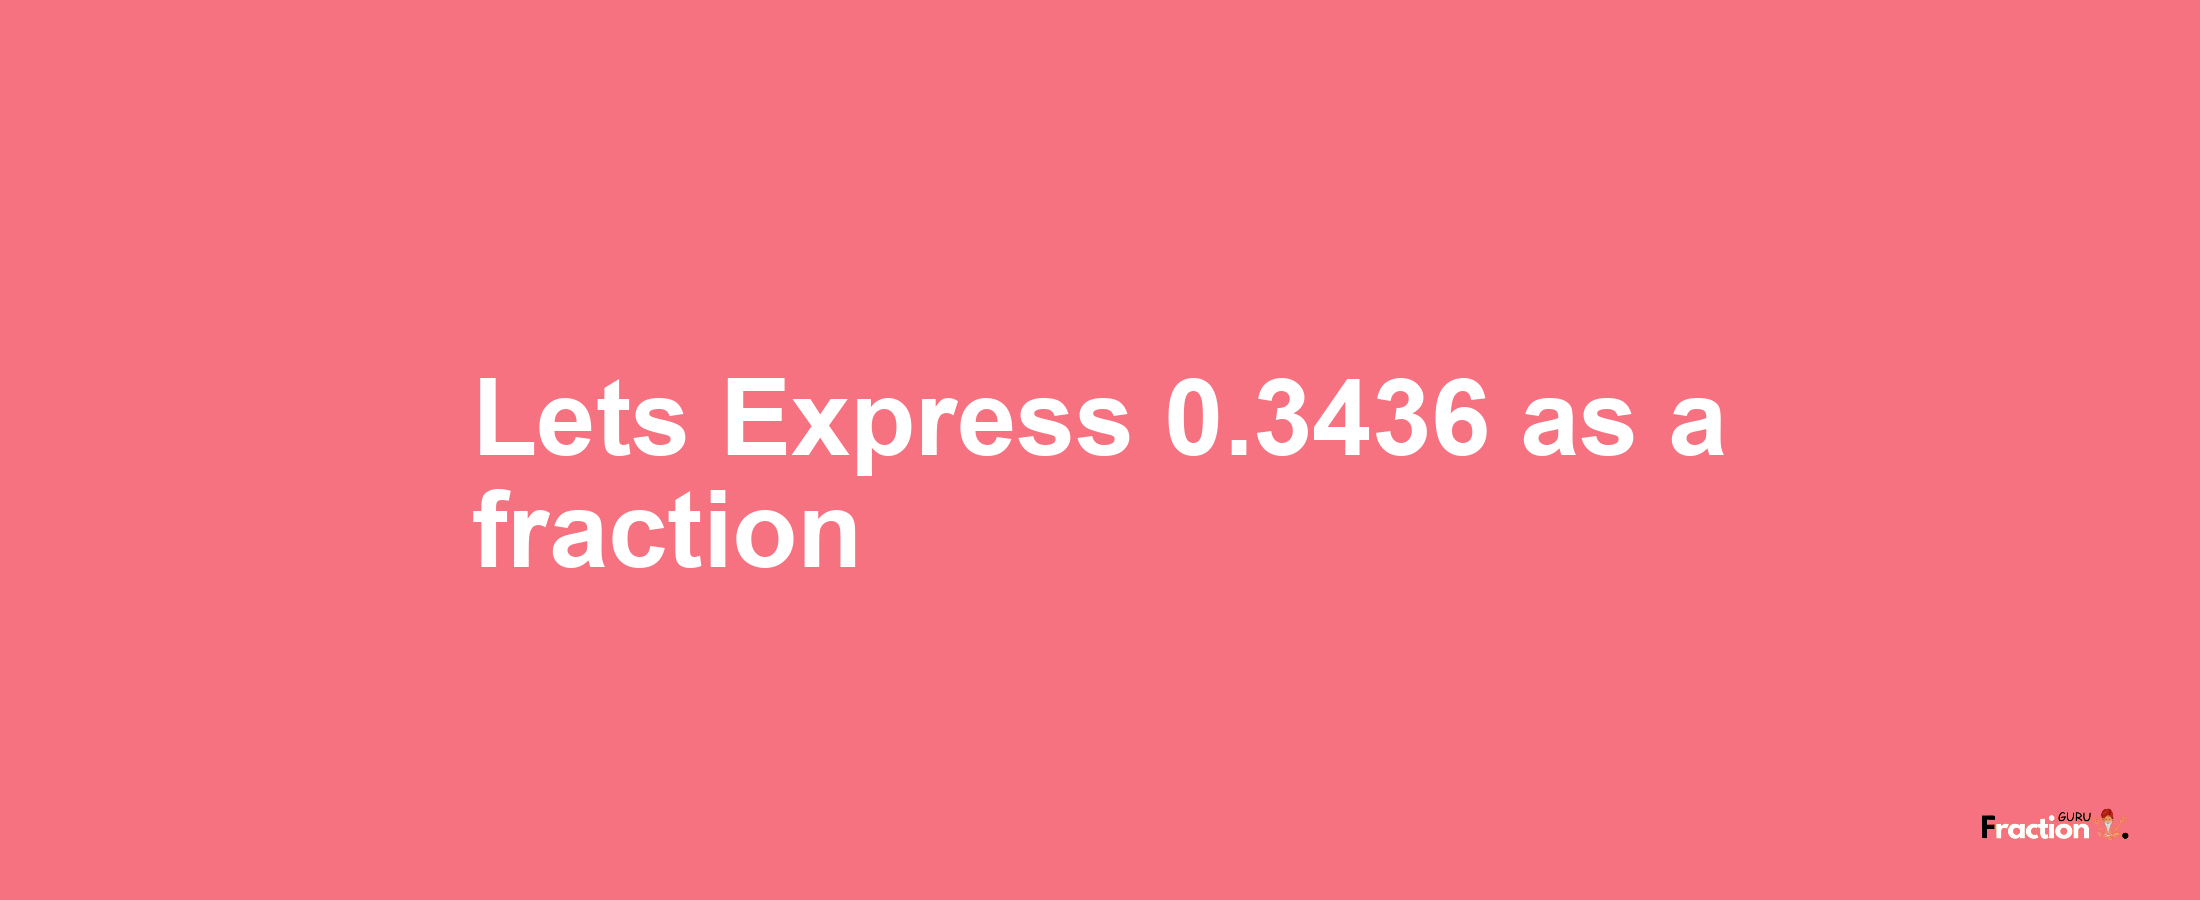 Lets Express 0.3436 as afraction